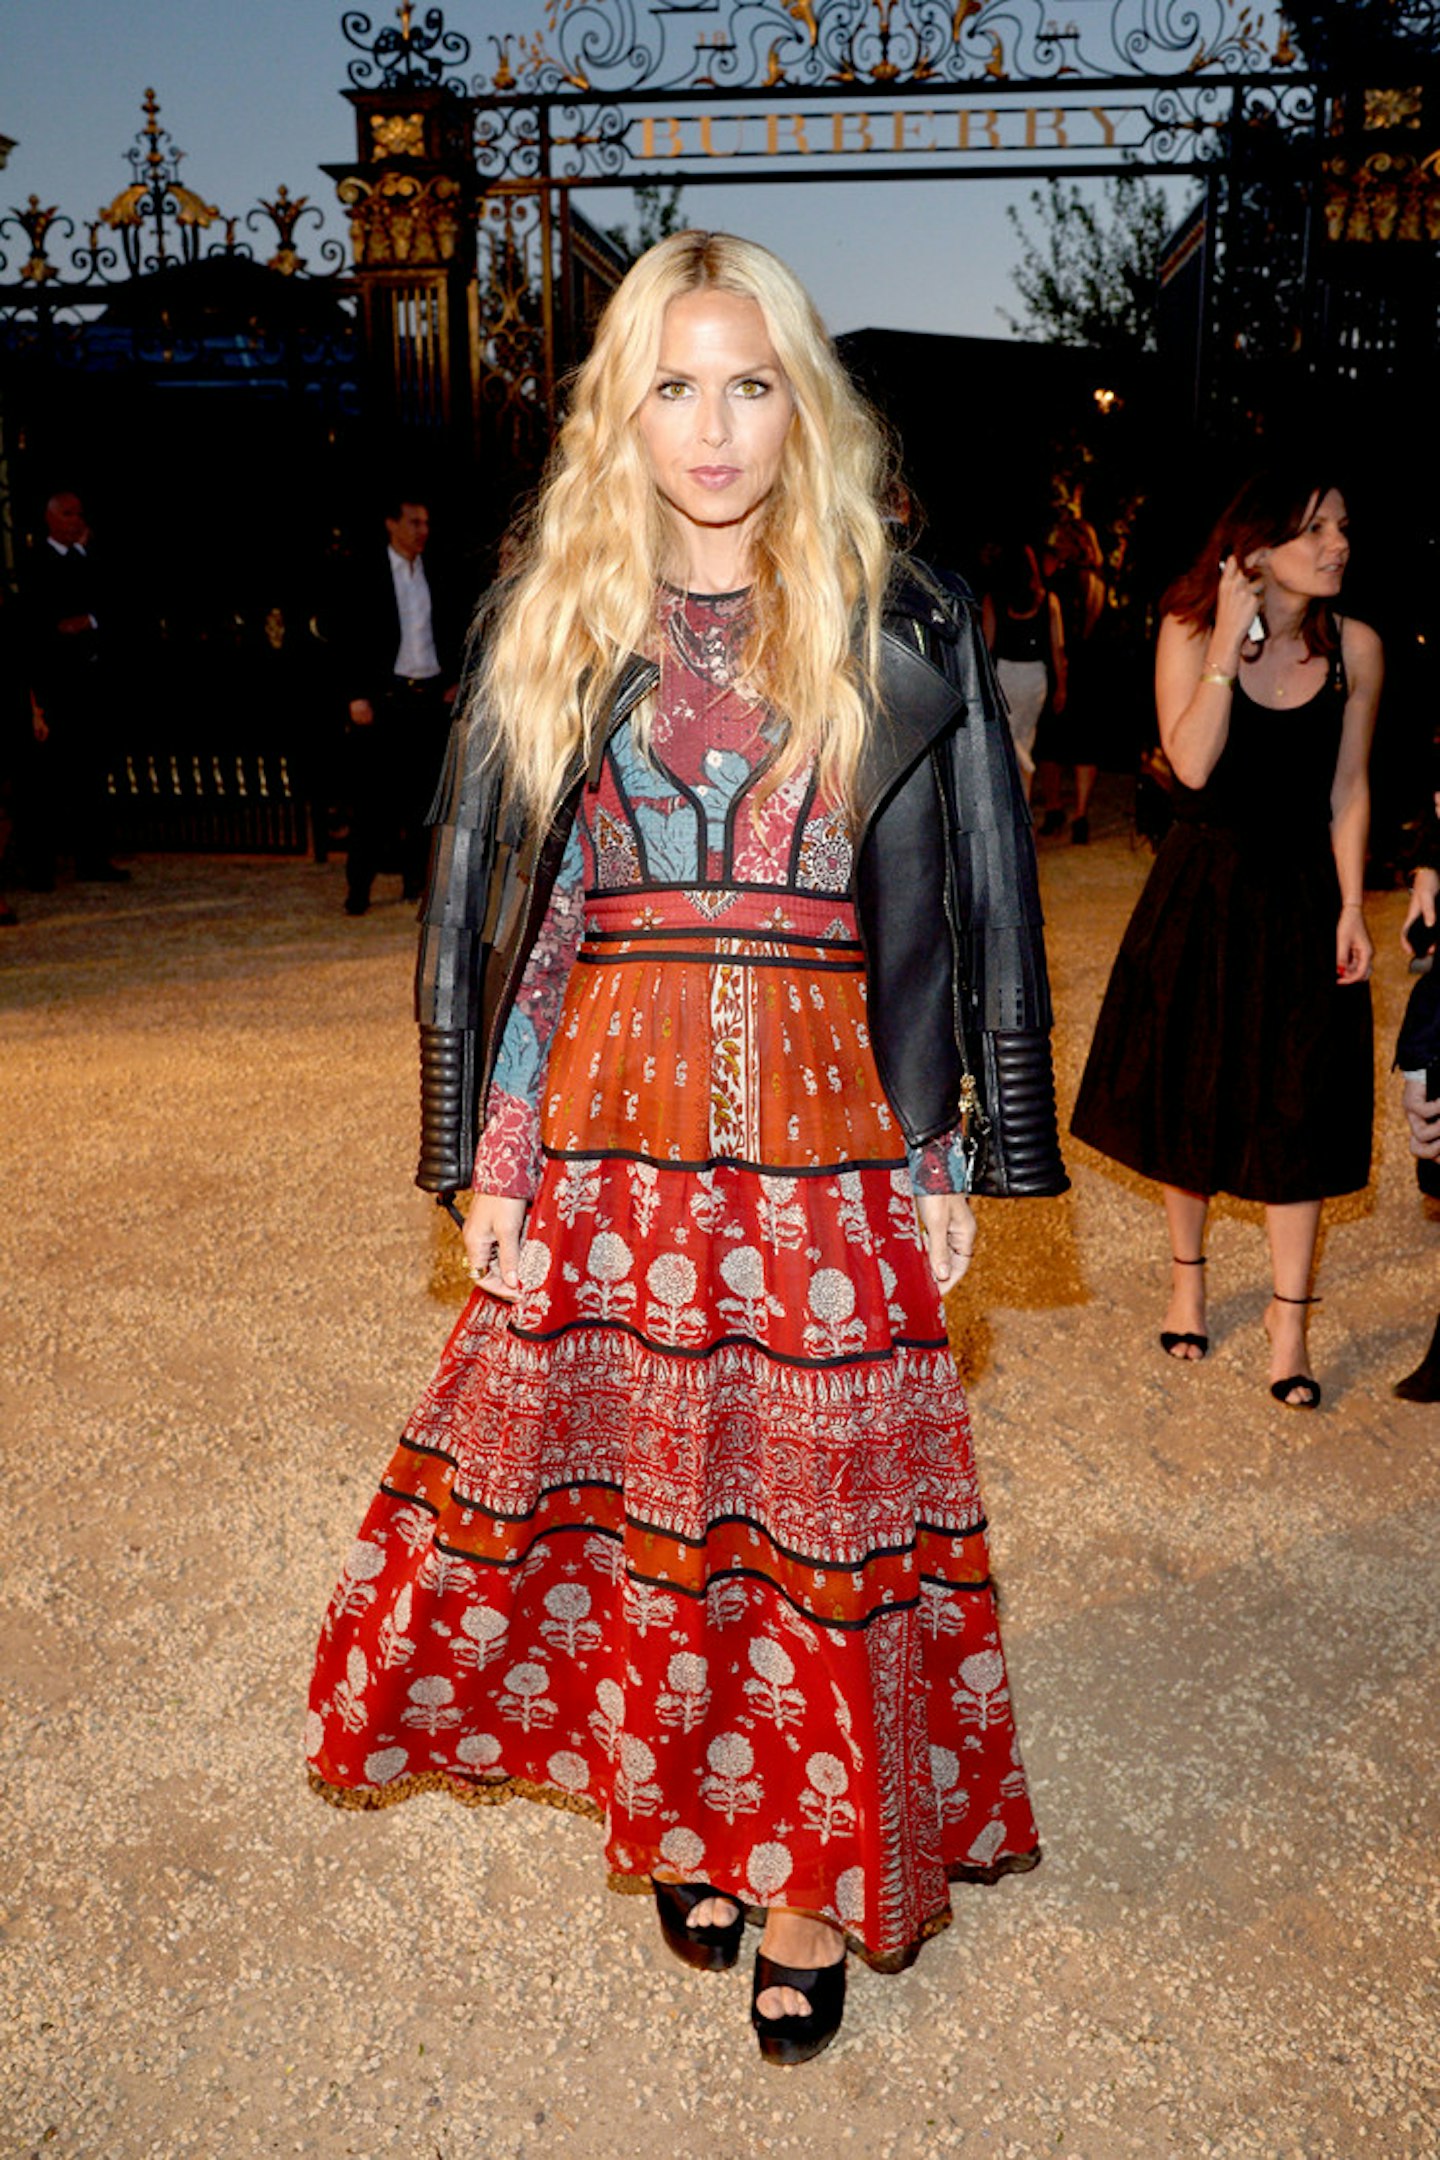 Rachel Zoe wearing Burberry at the Burberry _London in Los Angeles_ event